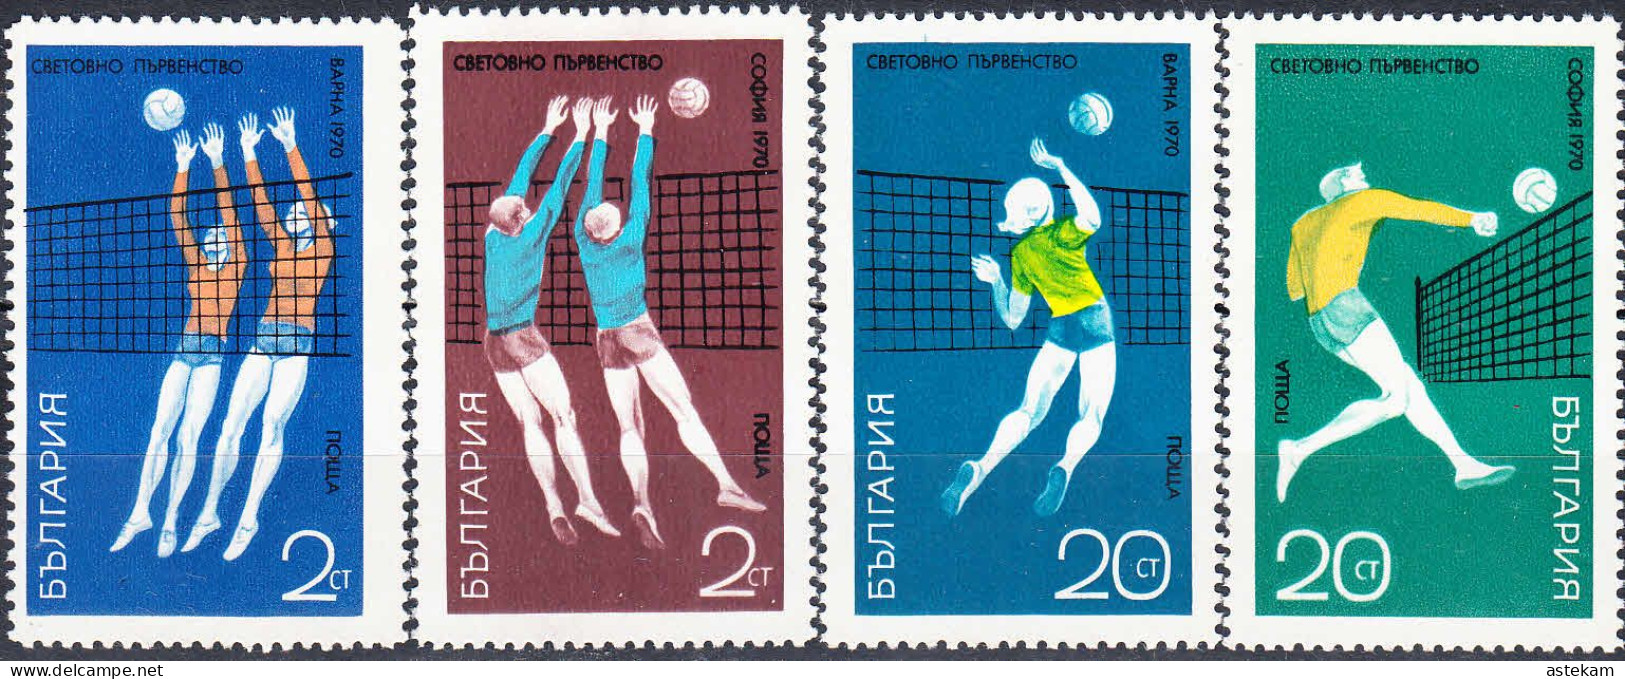 BULGARIA 1970, SPORT, WORLD VOLLEYBALL CHAMPIONSHIP For MEN And WOMEN In SOFIA, COMPLETE MNH SERIES With GOOD QUALITY*** - Ungebraucht